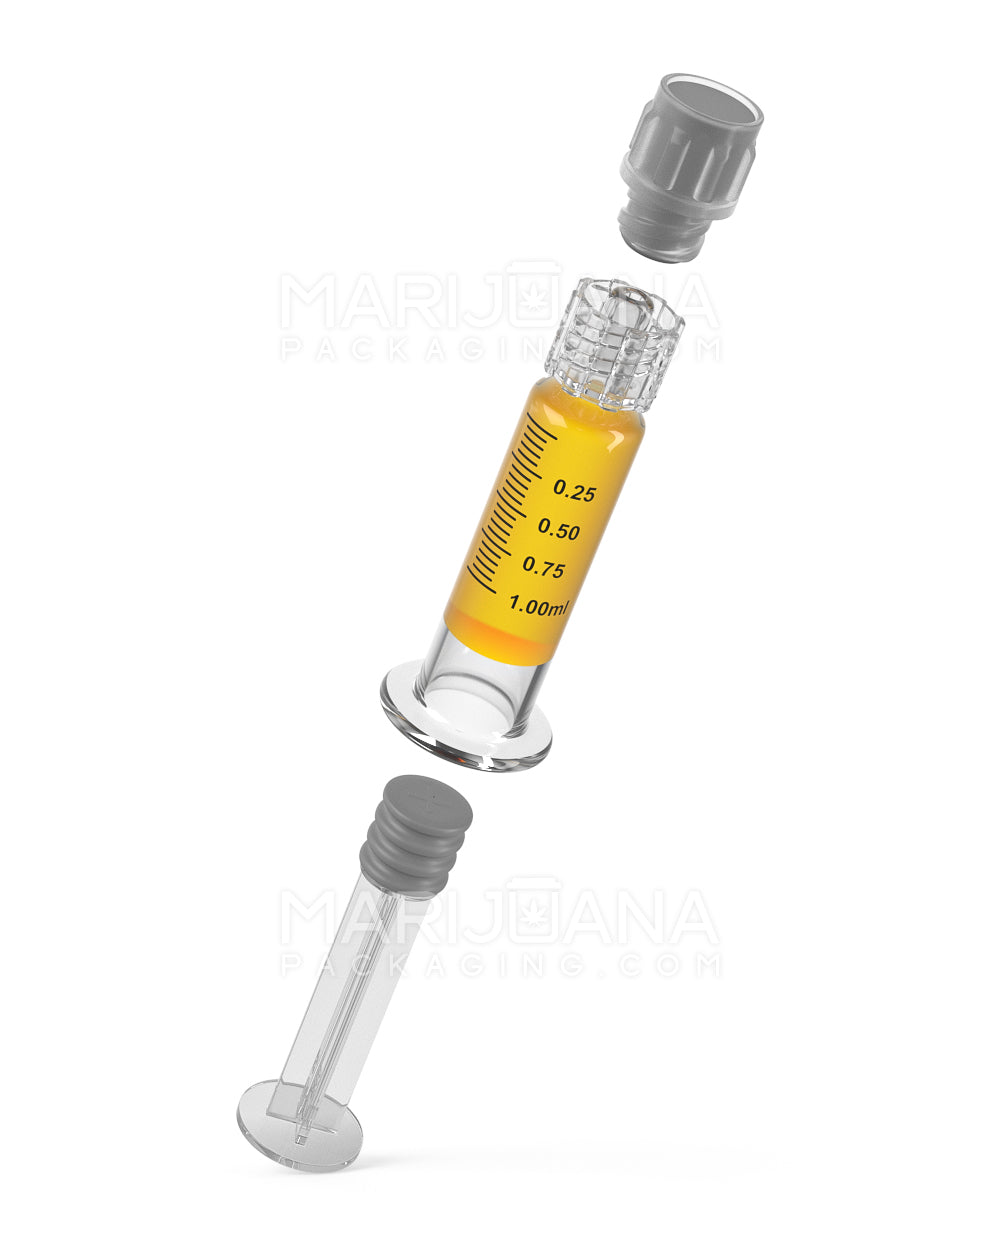 Luer Lock | Glass Dab Applicator Syringes | 1mL - 0.25mL Increments - 100 Count - 7